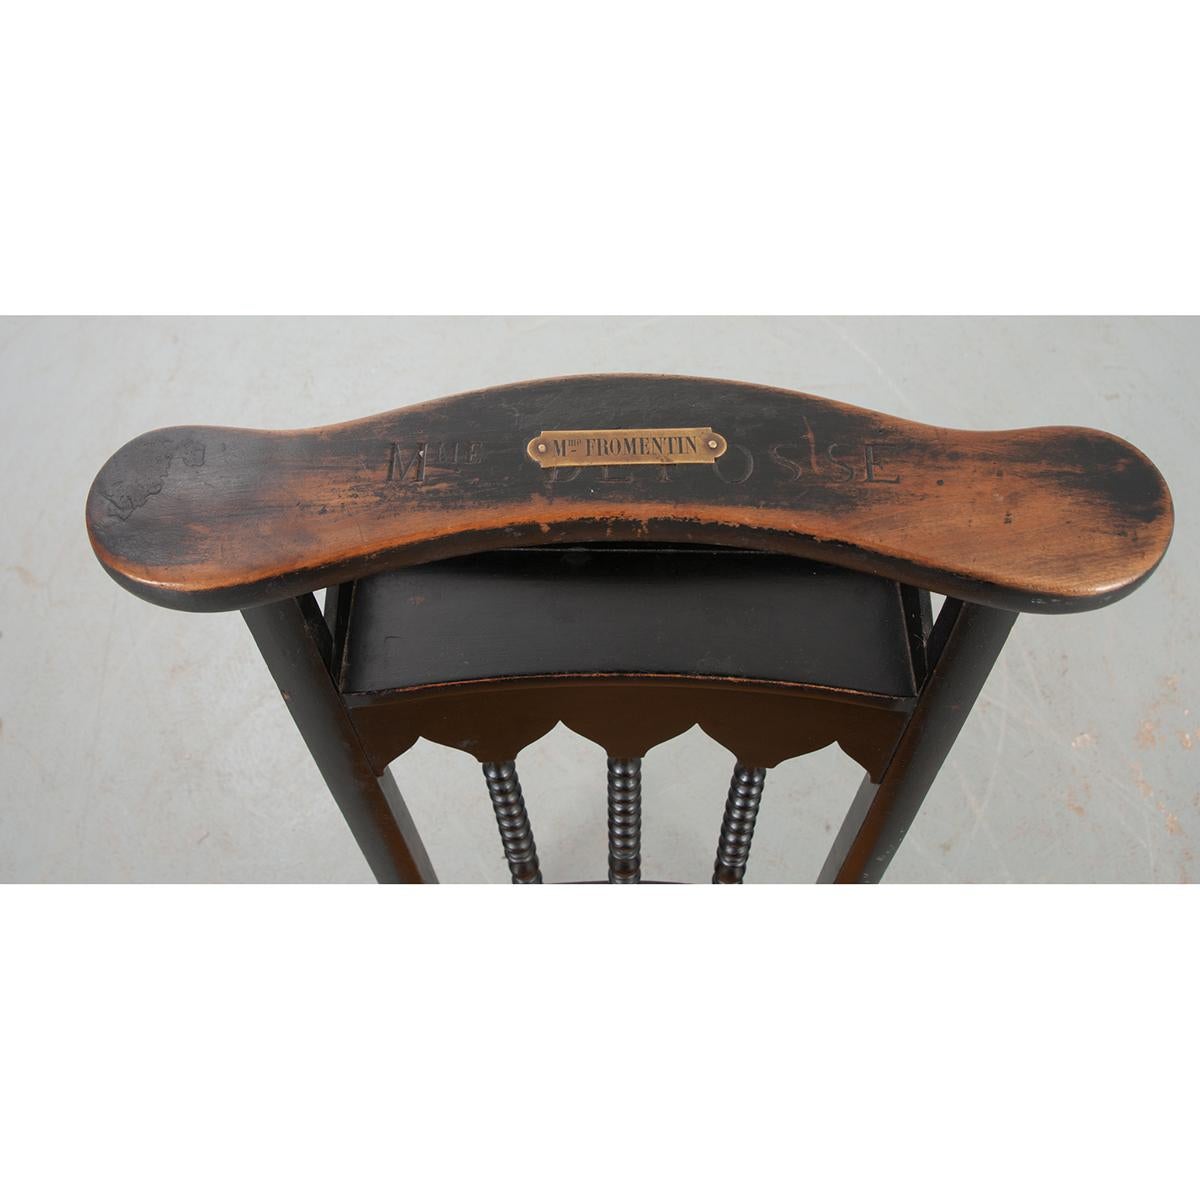 French 19th Century Rush Seat Prie Dieu In Good Condition For Sale In Baton Rouge, LA